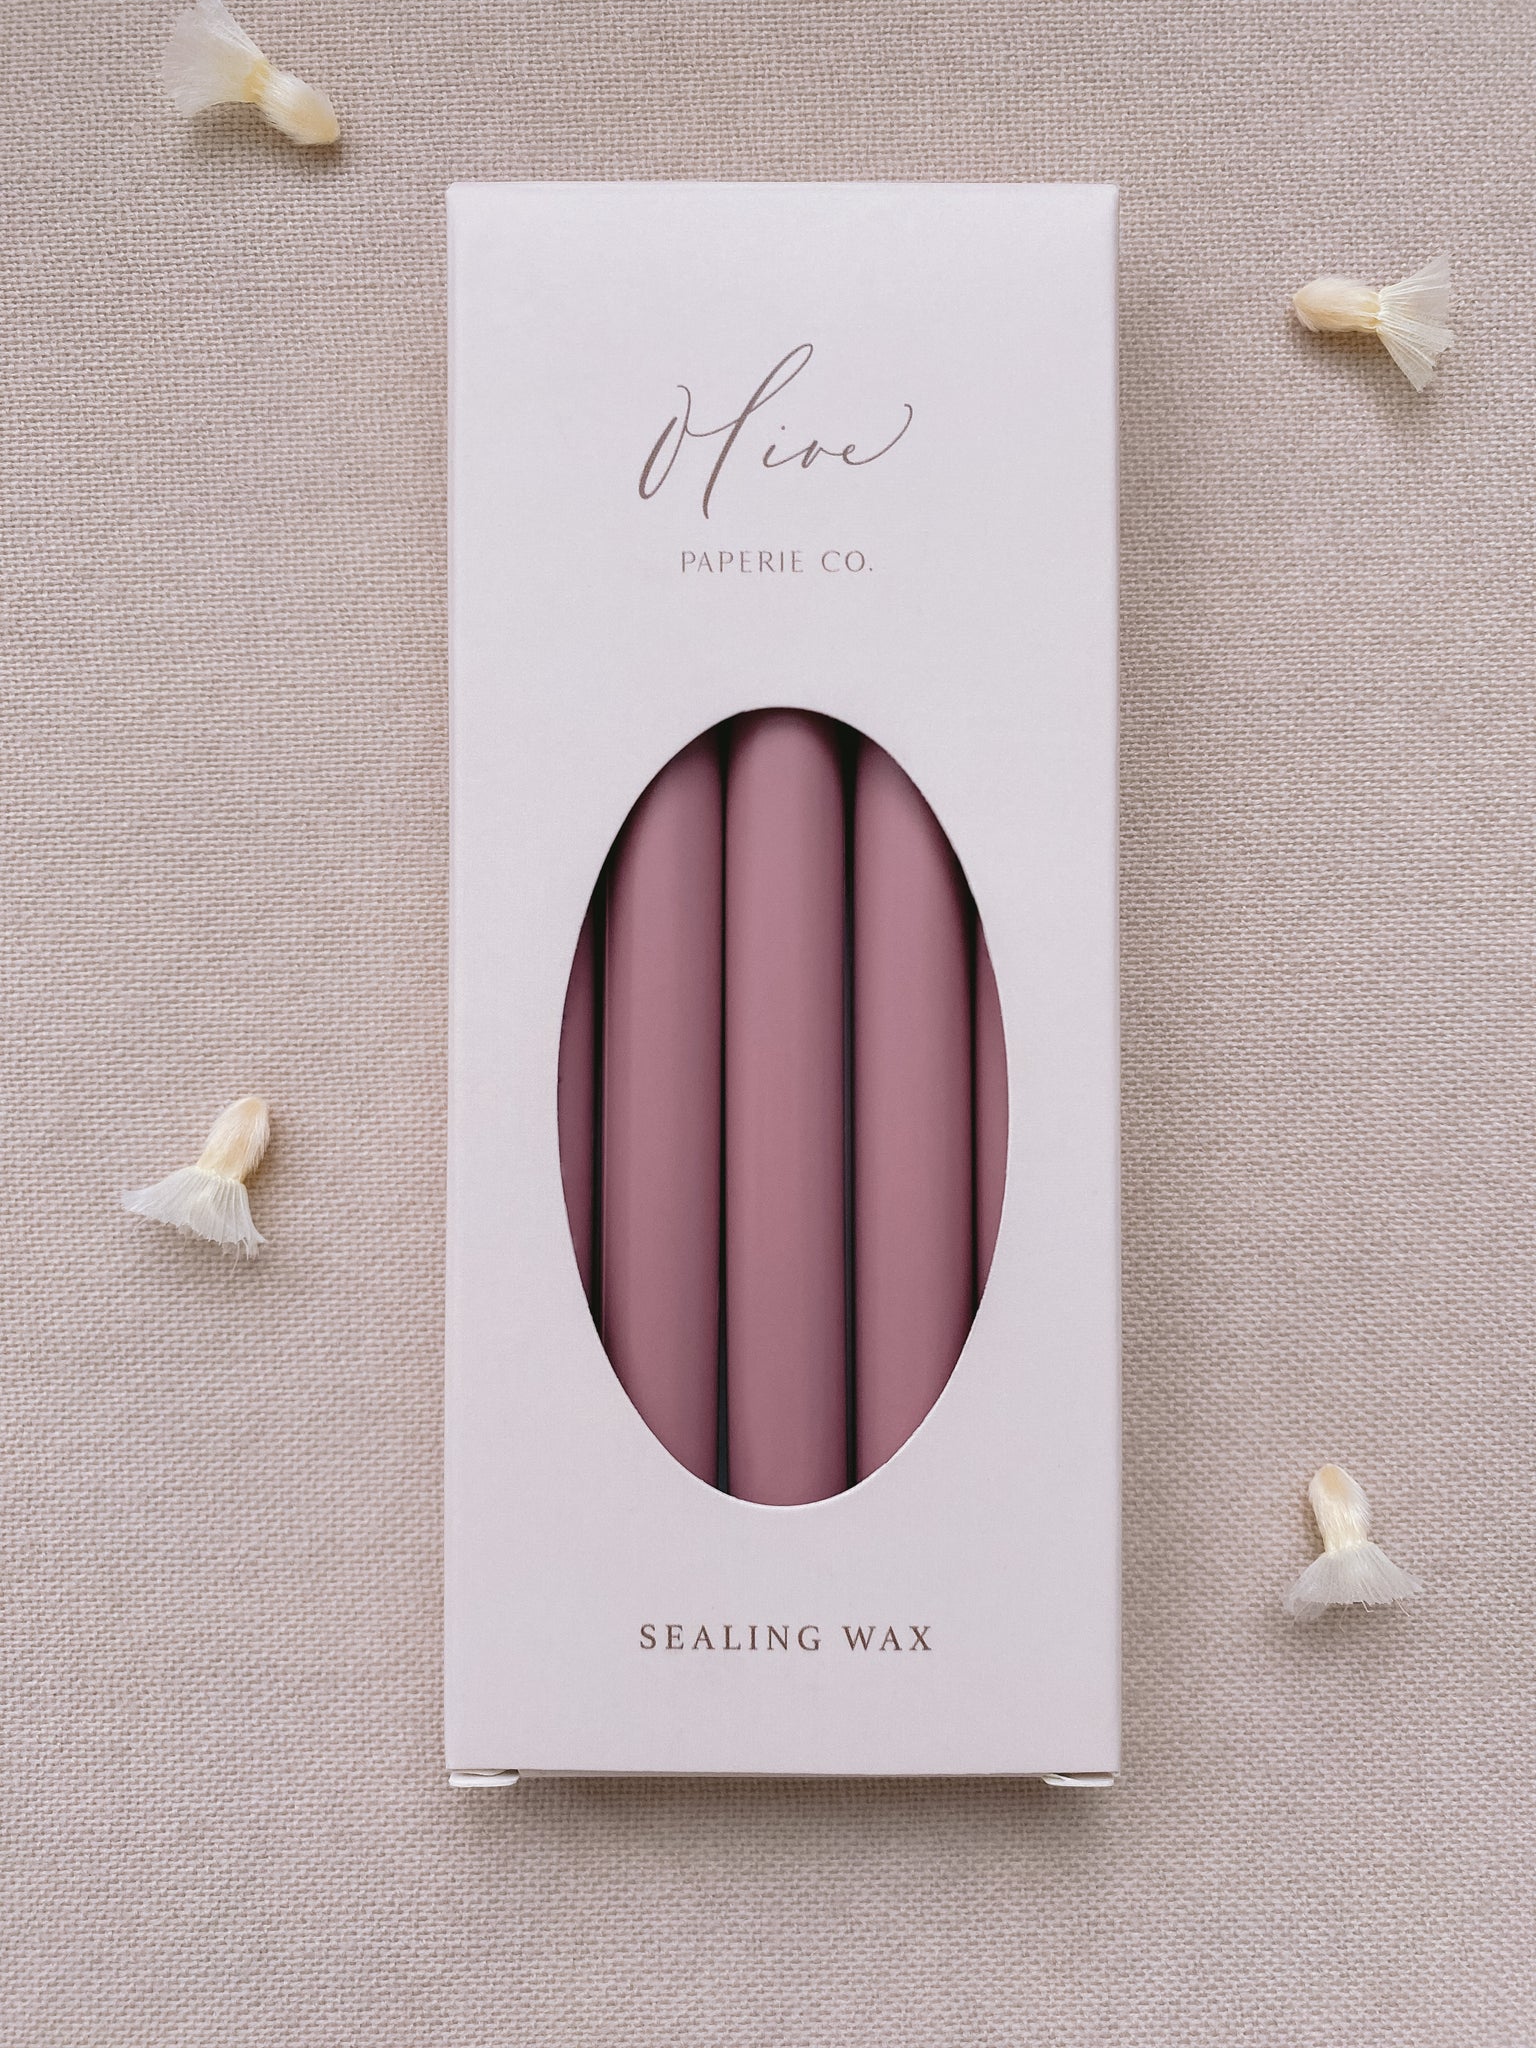 a box of 5 glue gun sealing wax sticks in rosewood color styled with dried flower petals